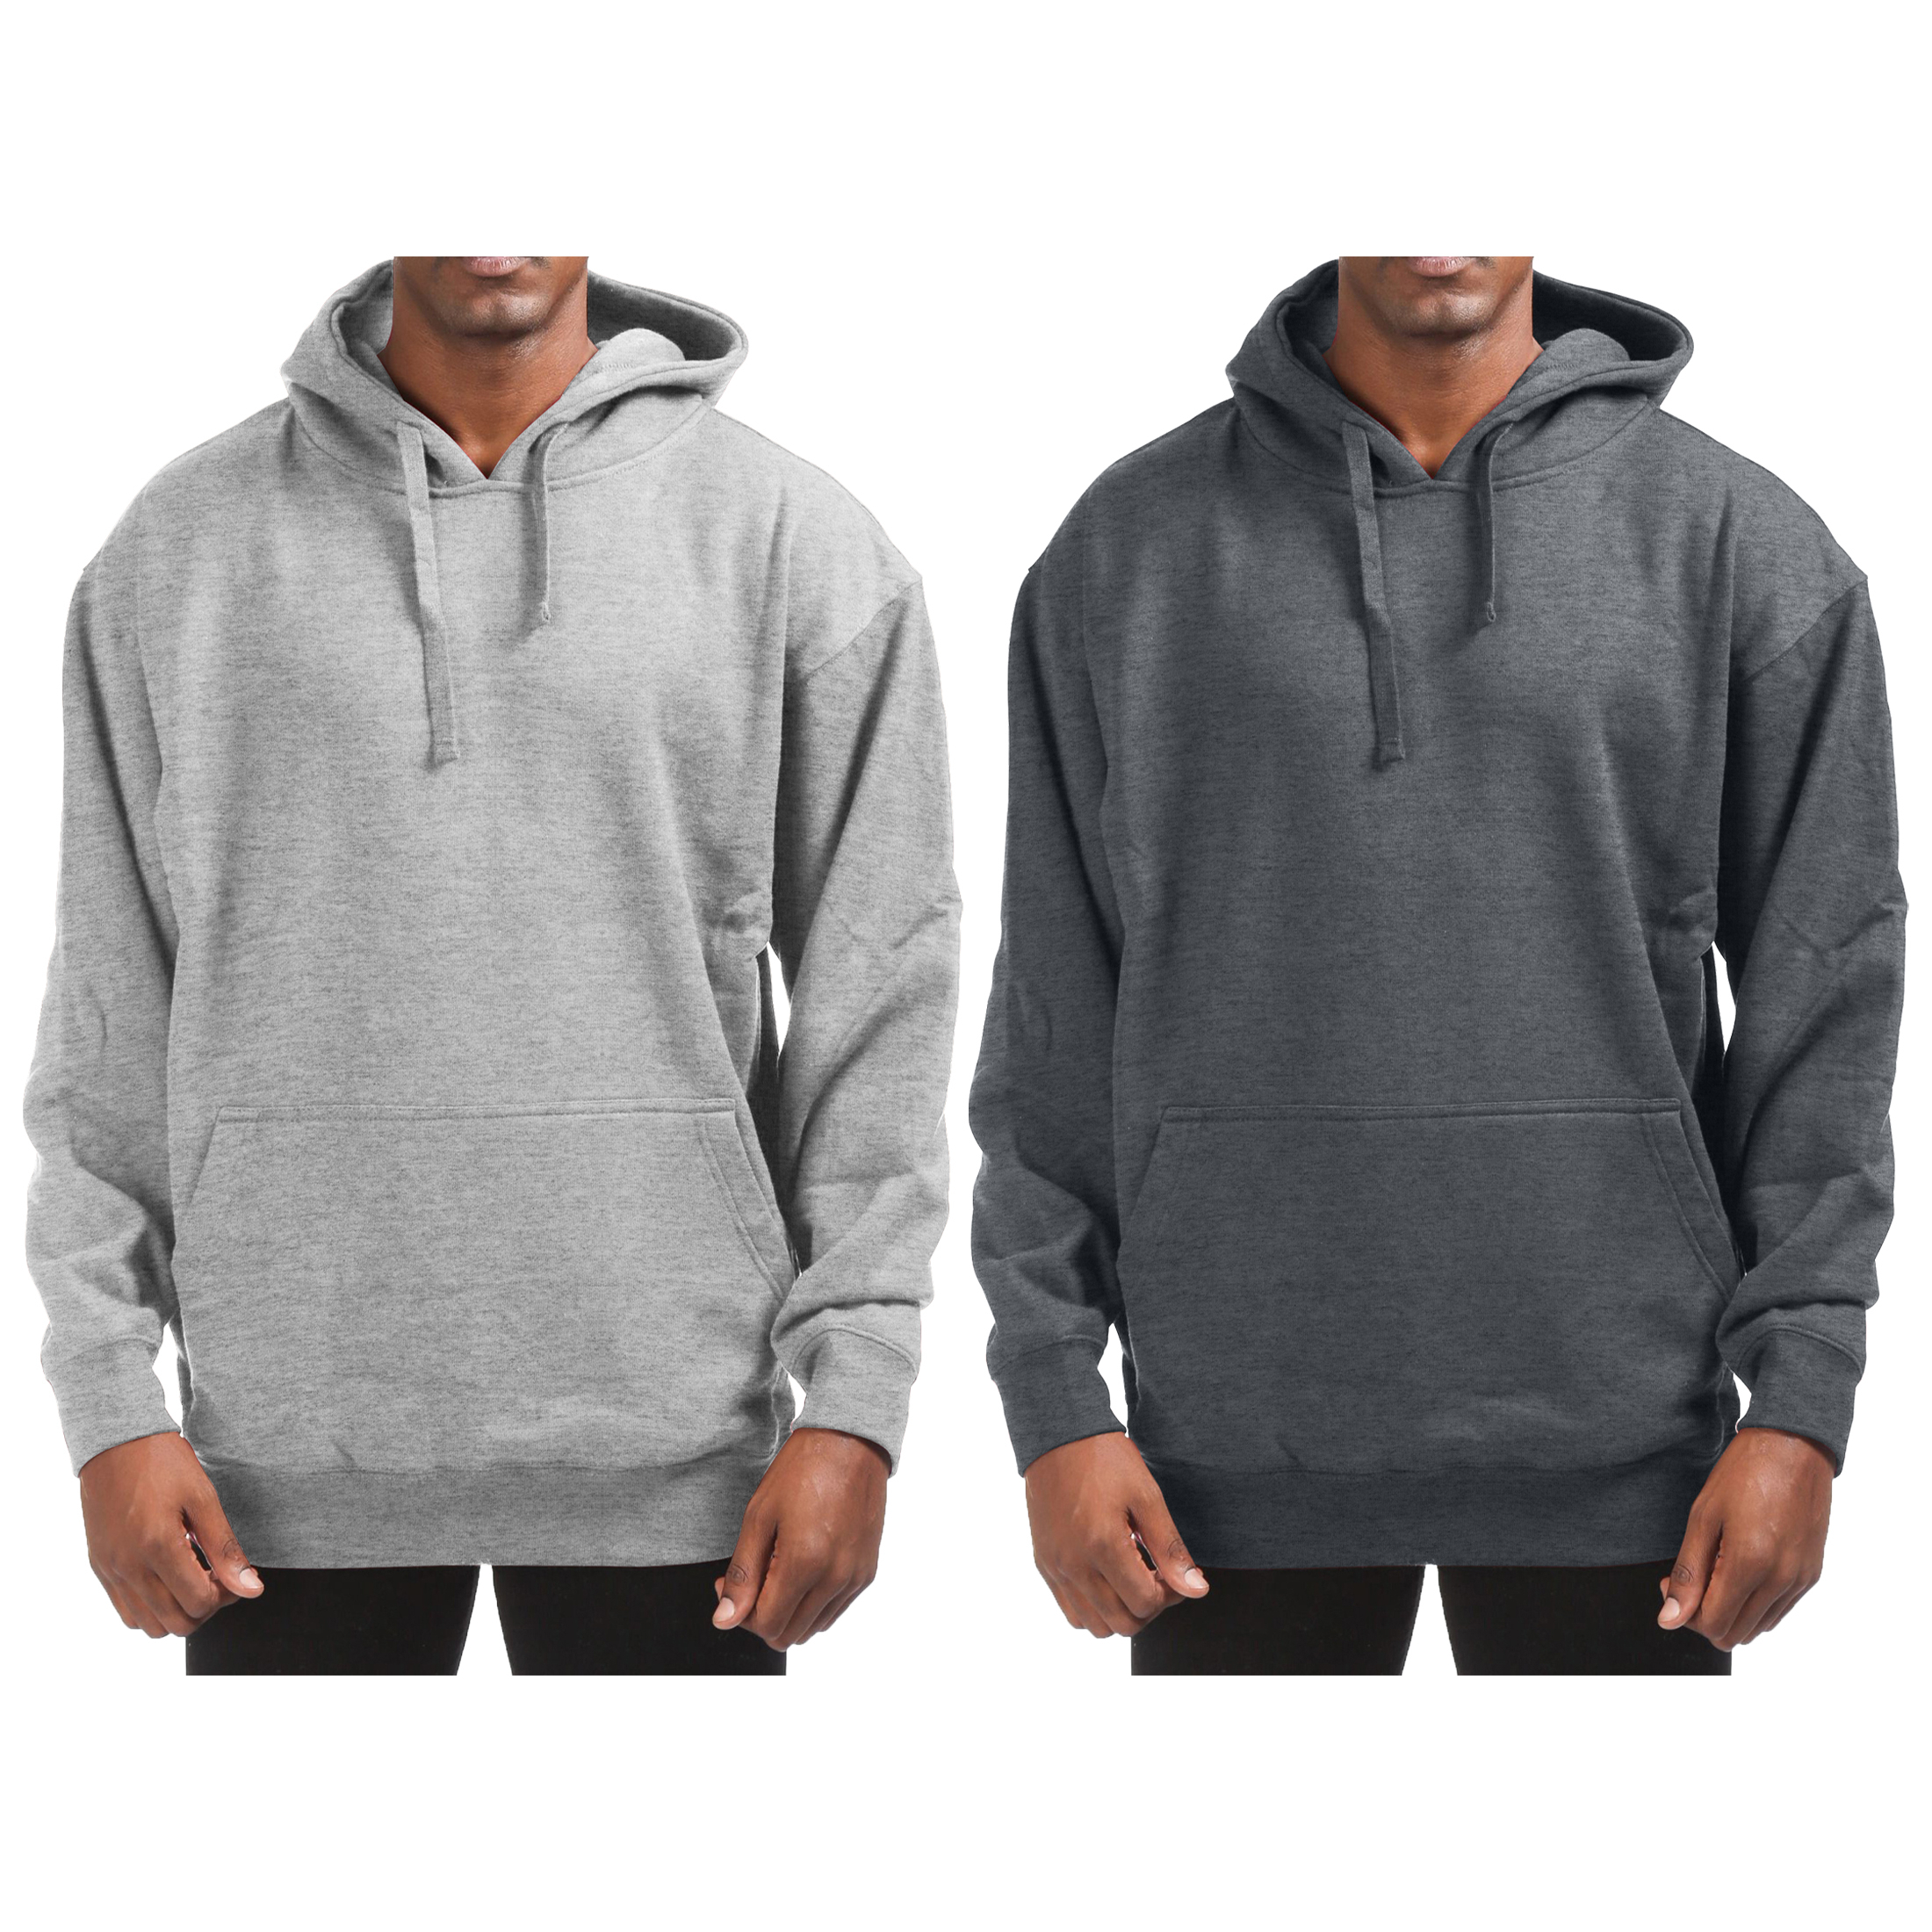 1-PACK Men's Cotton-Blend Fleece Pullover Hoodie With Pocket - 2XL